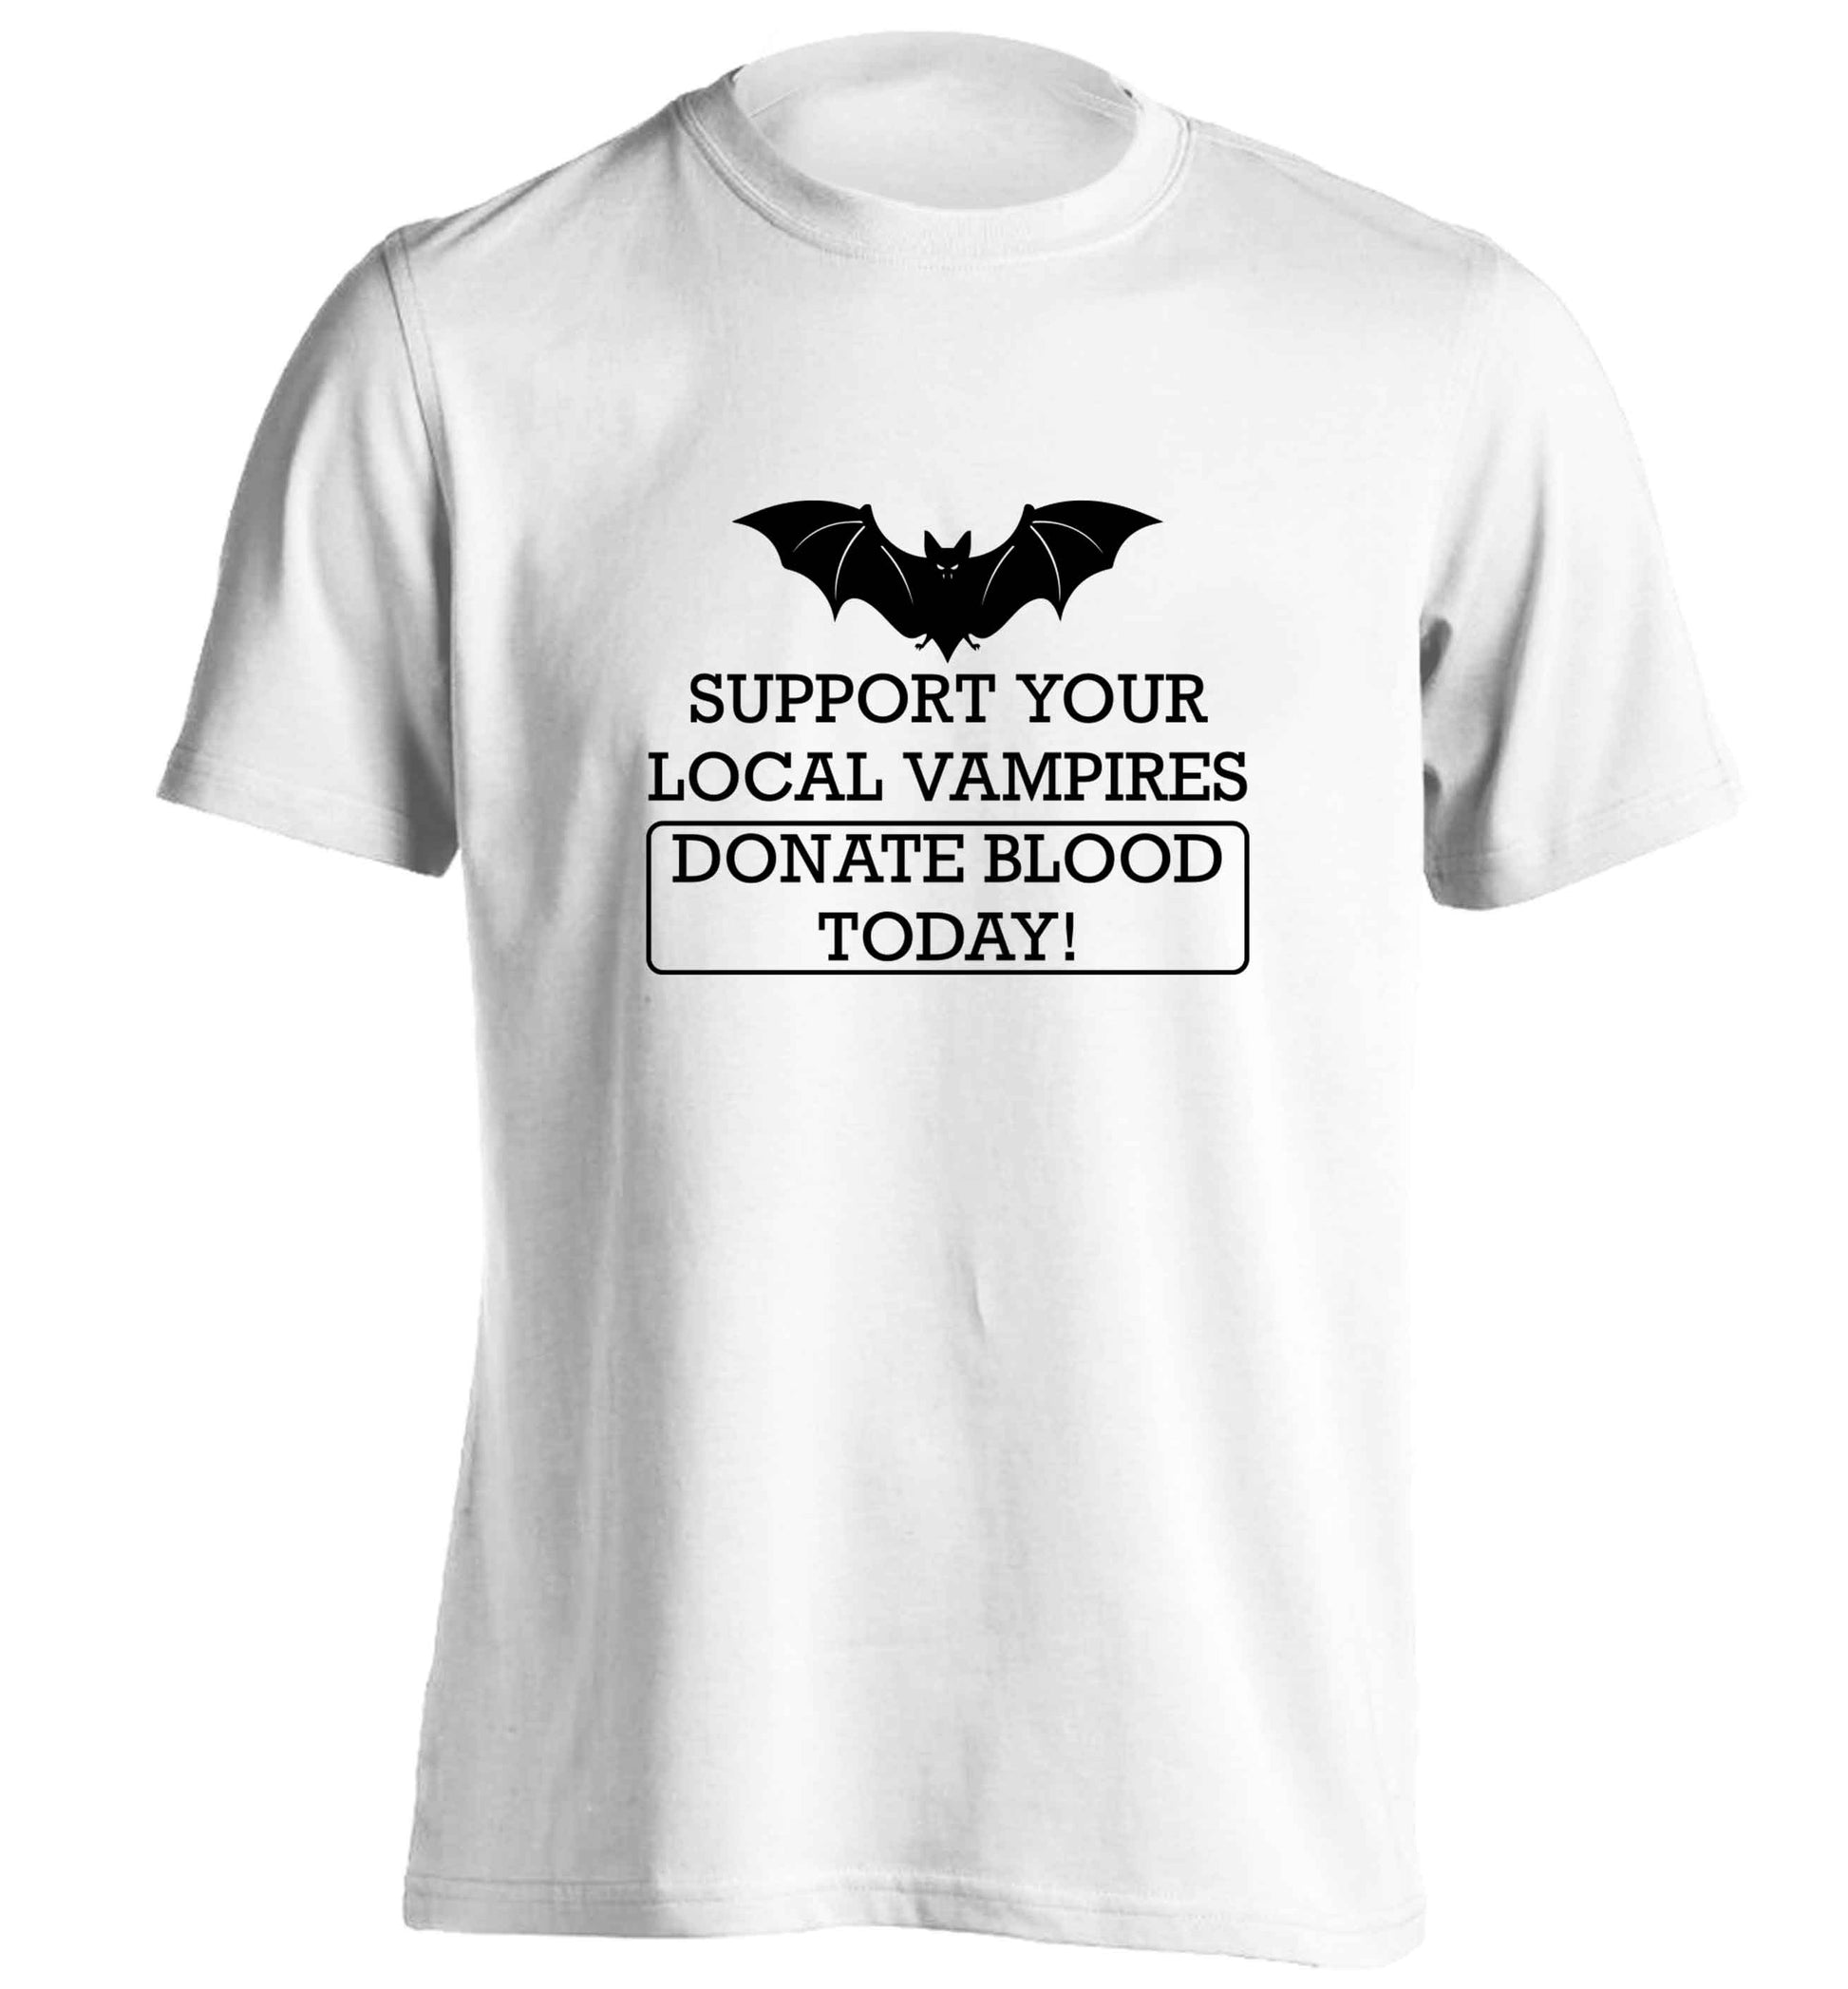 Support your local vampires donate blood today! adults unisex white Tshirt 2XL